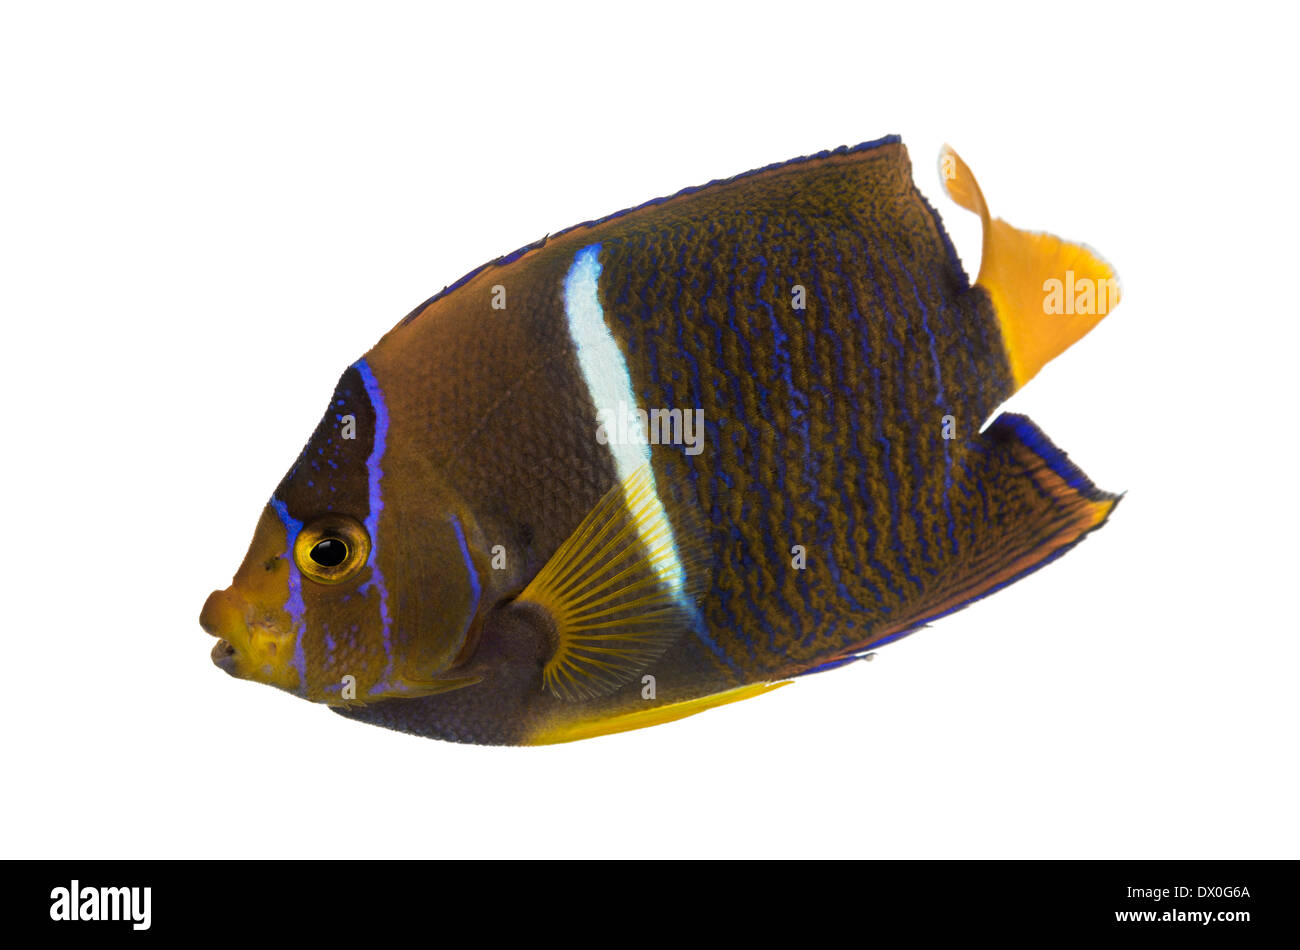 Side view of a Passer Angelfish, Holacanthus passer, against white background Stock Photo